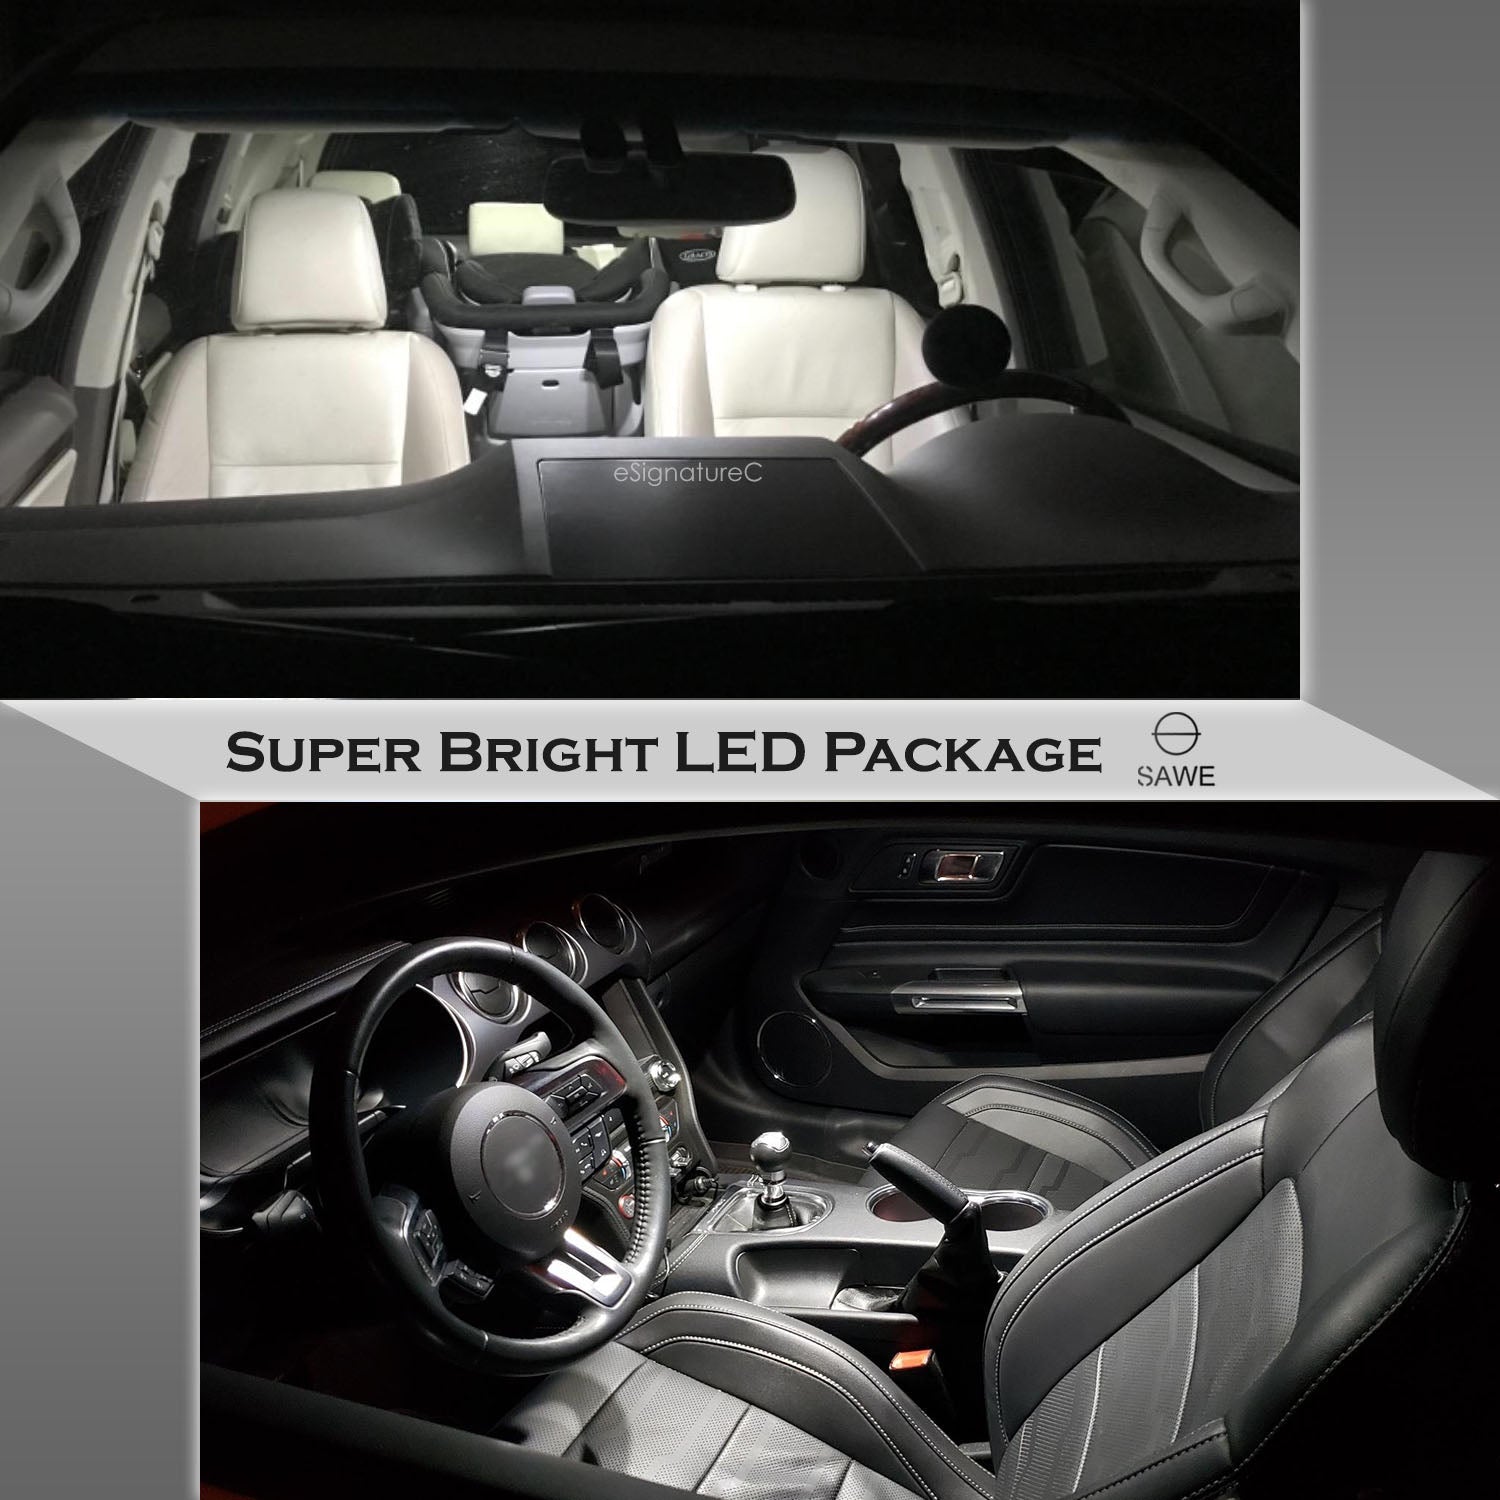 For Audi A6 S6 Interior LED Lights - Dome & Map Light Bulb Package Kit for 2012 - 2015 - White